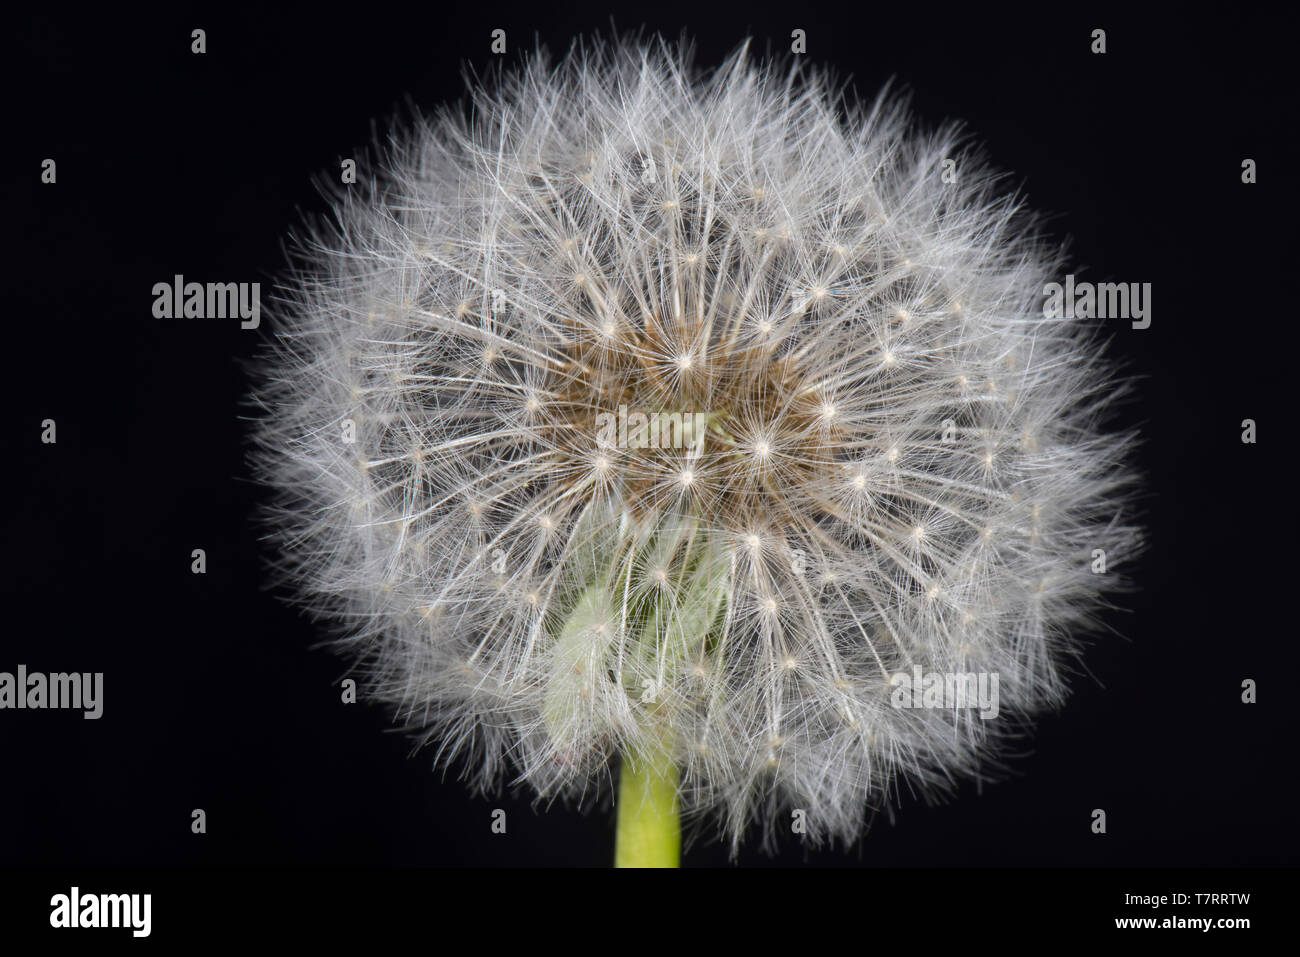 Studio image of a dandelion (Taraxacum officinale) seed head showing pappus, beak and achene for wind dispersal Stock Photo